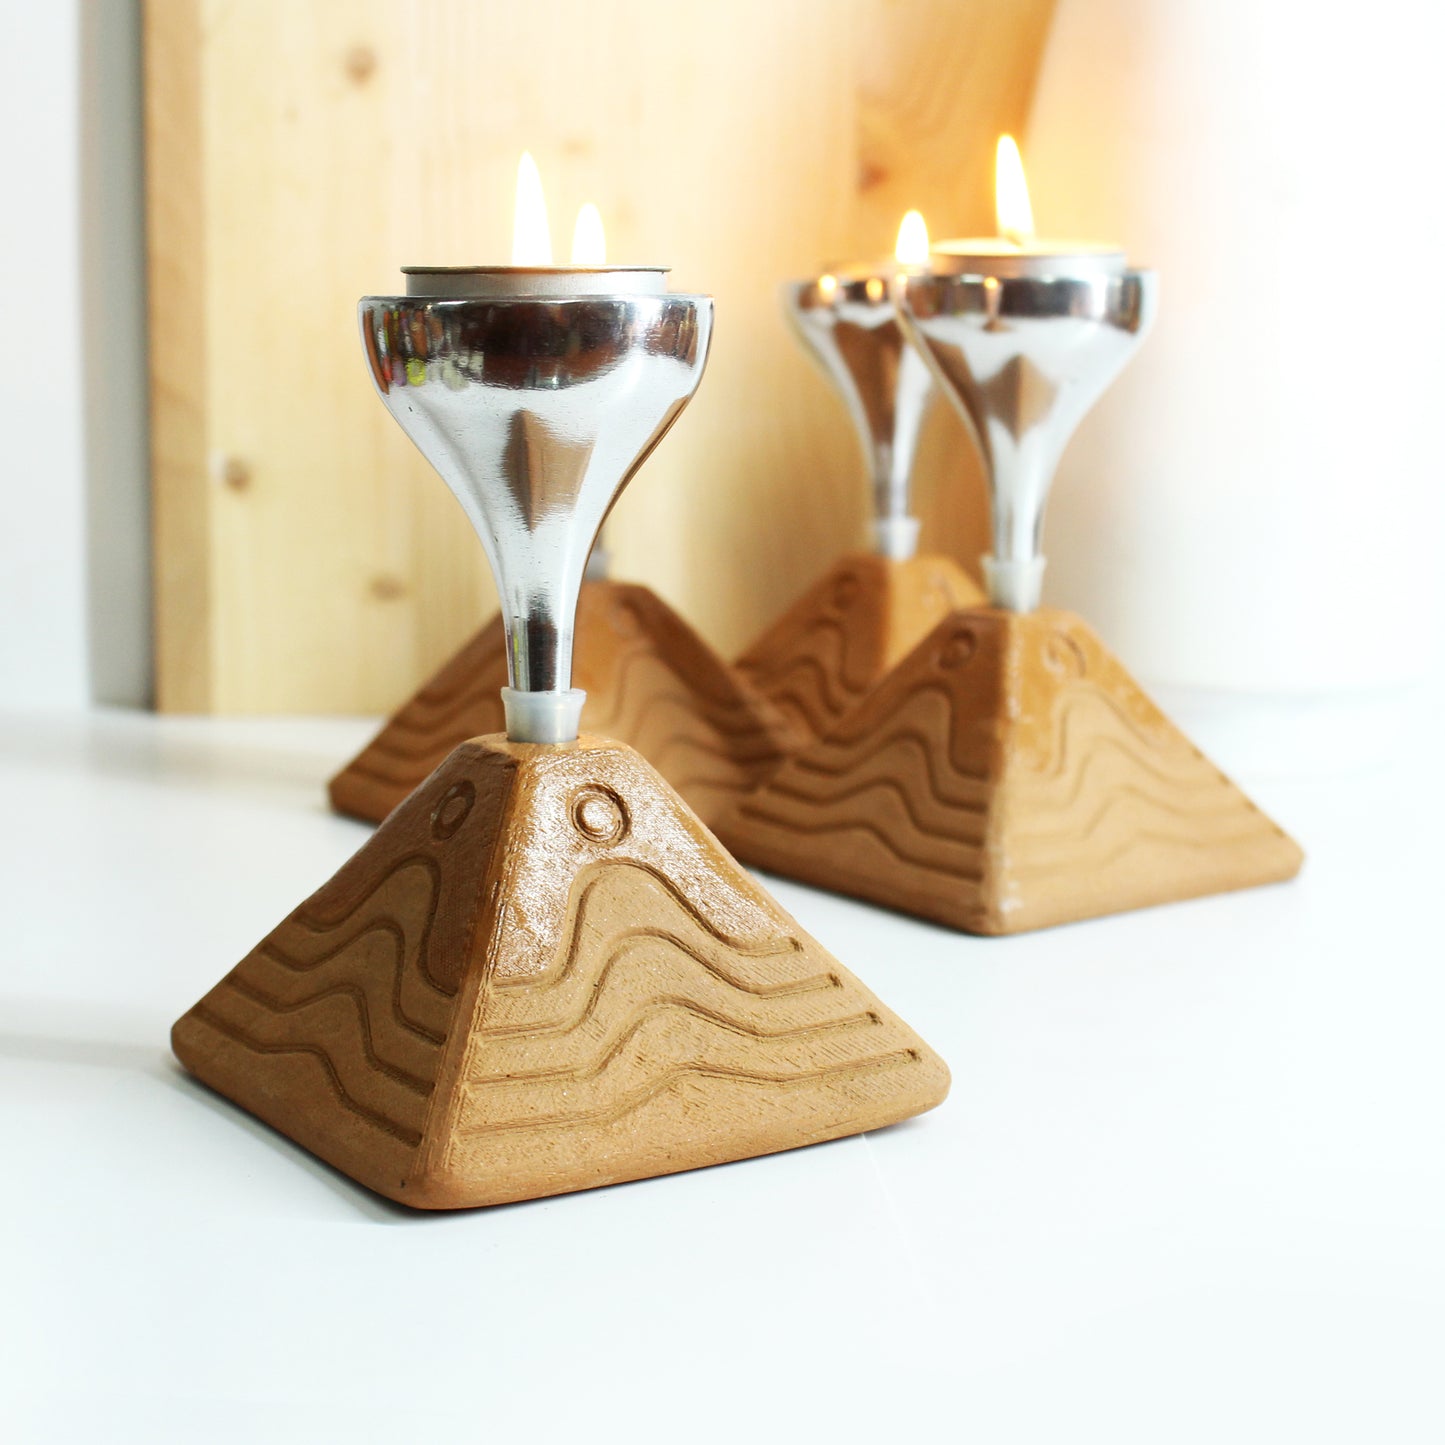 Handcrafted Terracotta Bliss Pyramid with Aluminum Funnel Candle Holder Set of 4 + tealights Complmentry